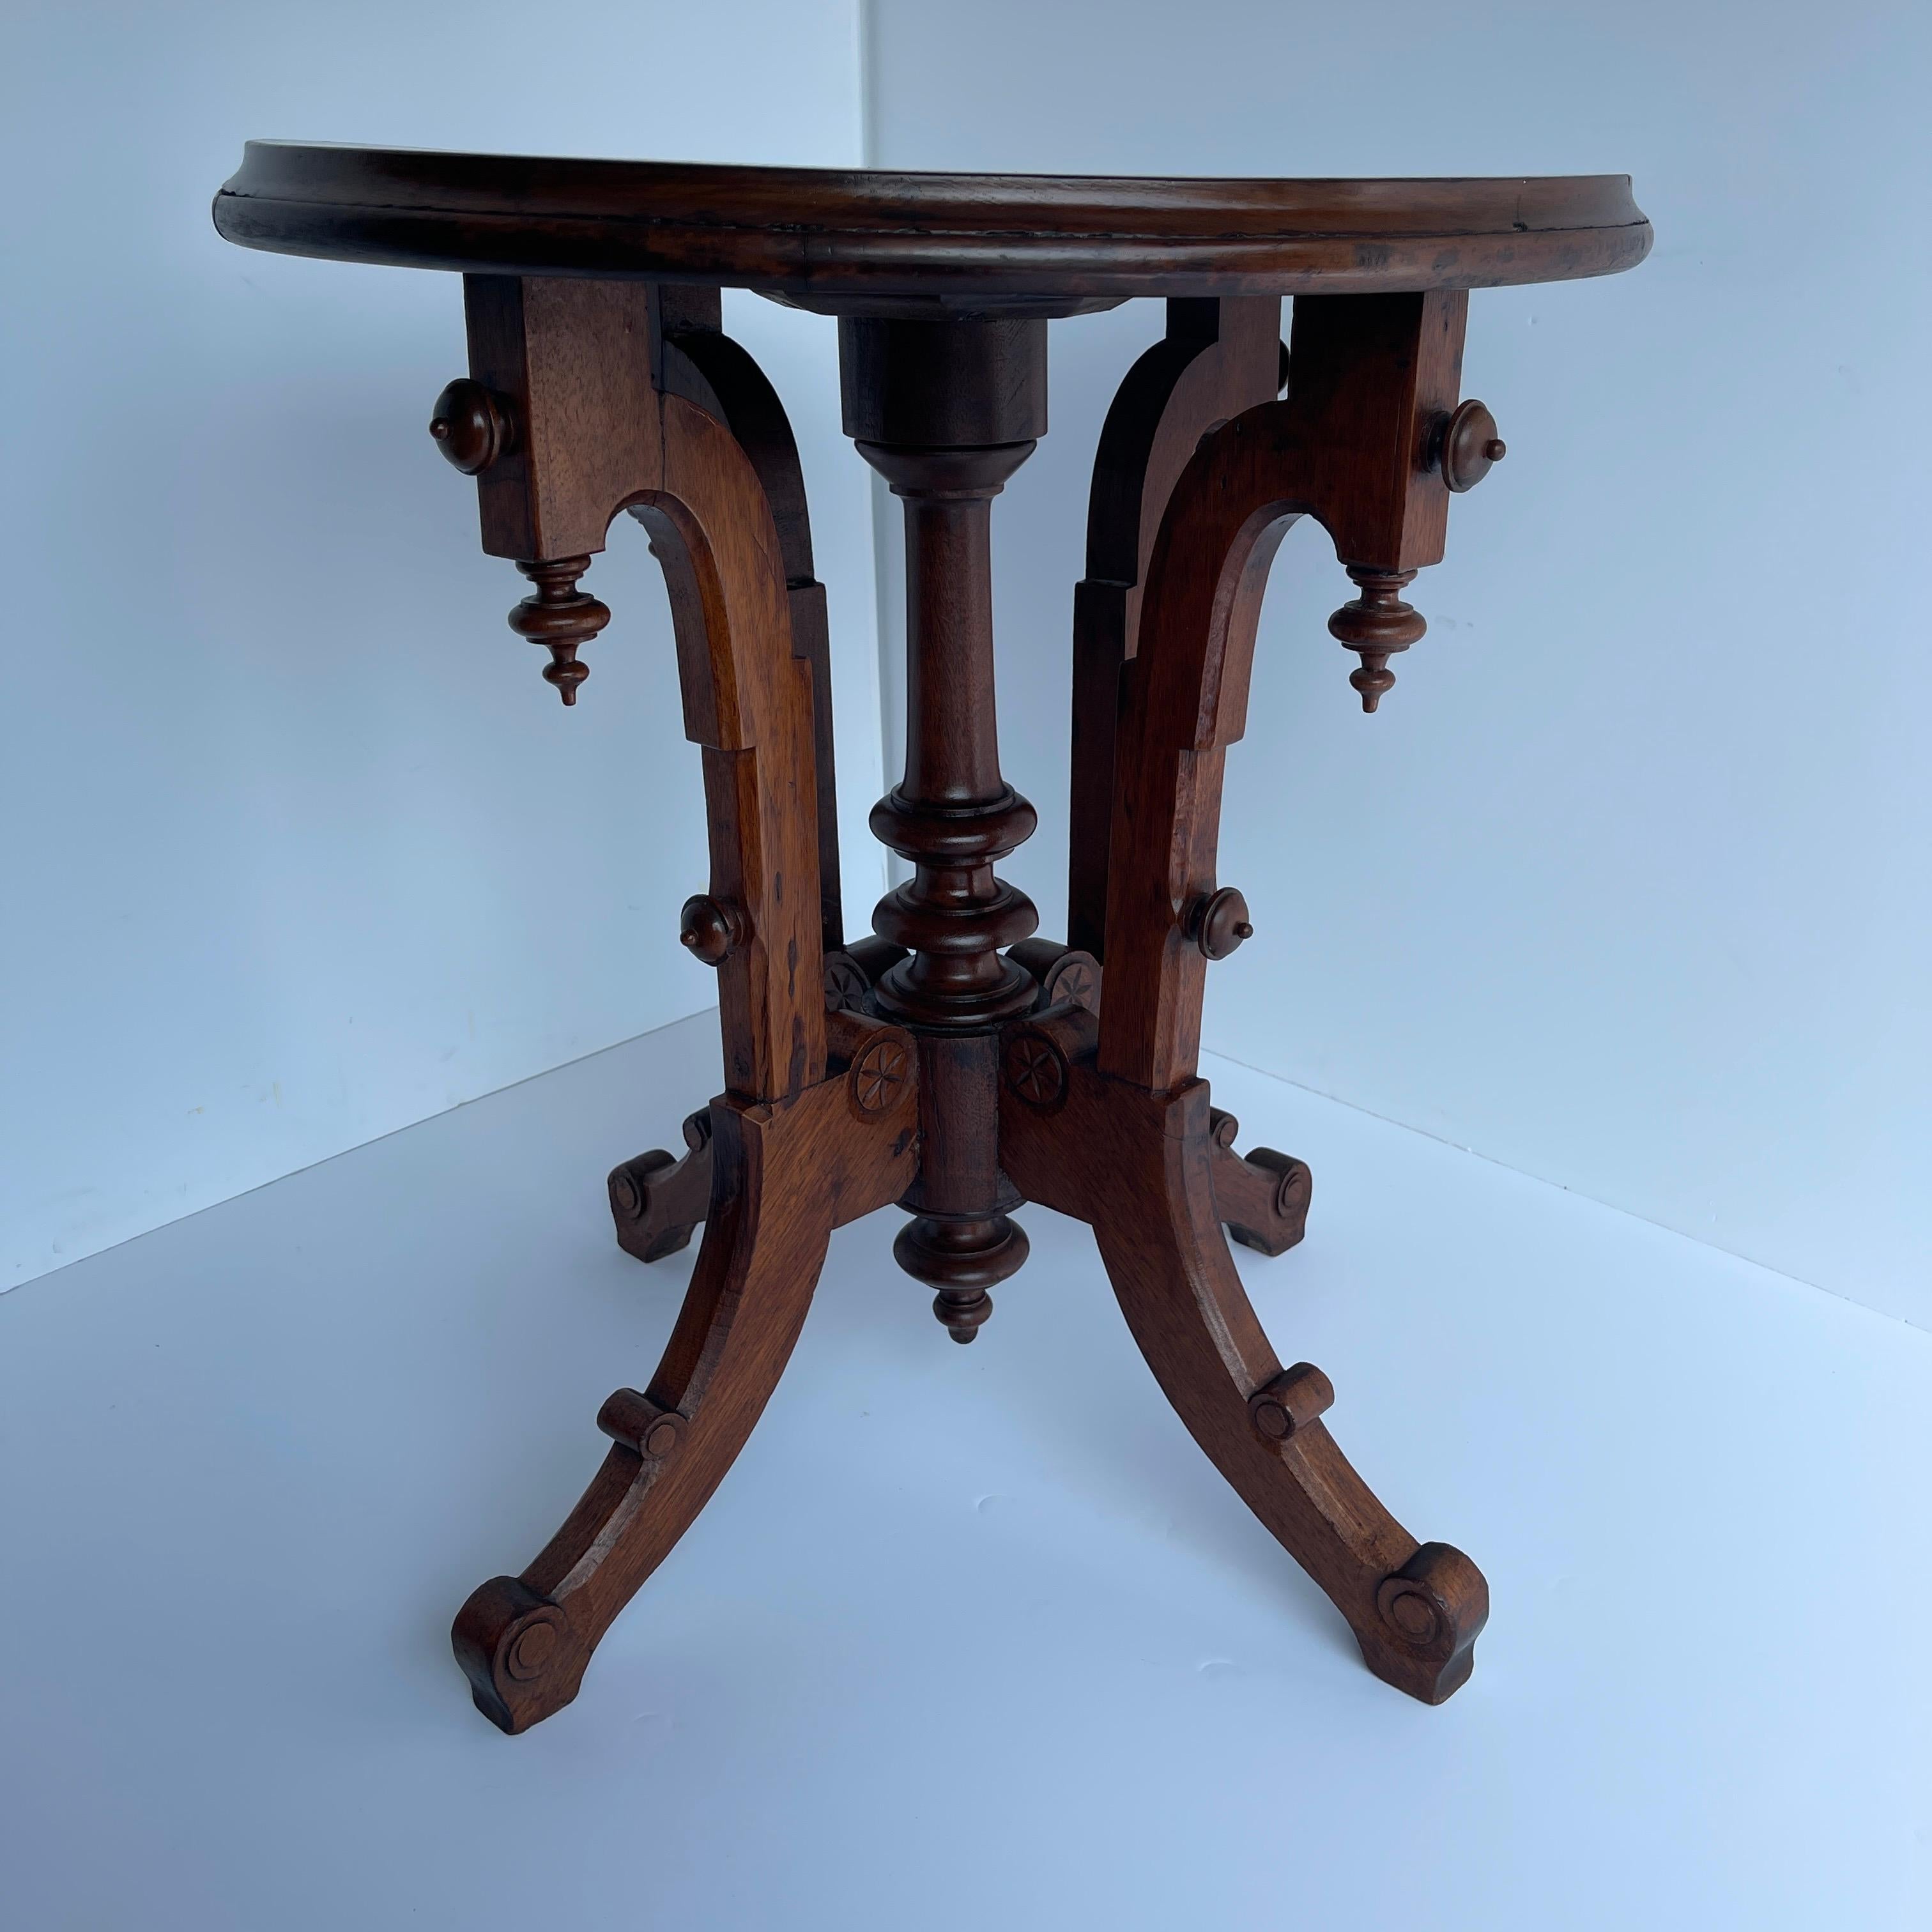 Late 19th century Gothic style round occasional side table.
Beautiful rich wood with ornately carved decorated sides, the curved legs hold this table in many settings or rooms of your home. Tall and perfectly suited beside a sofa as well as next to